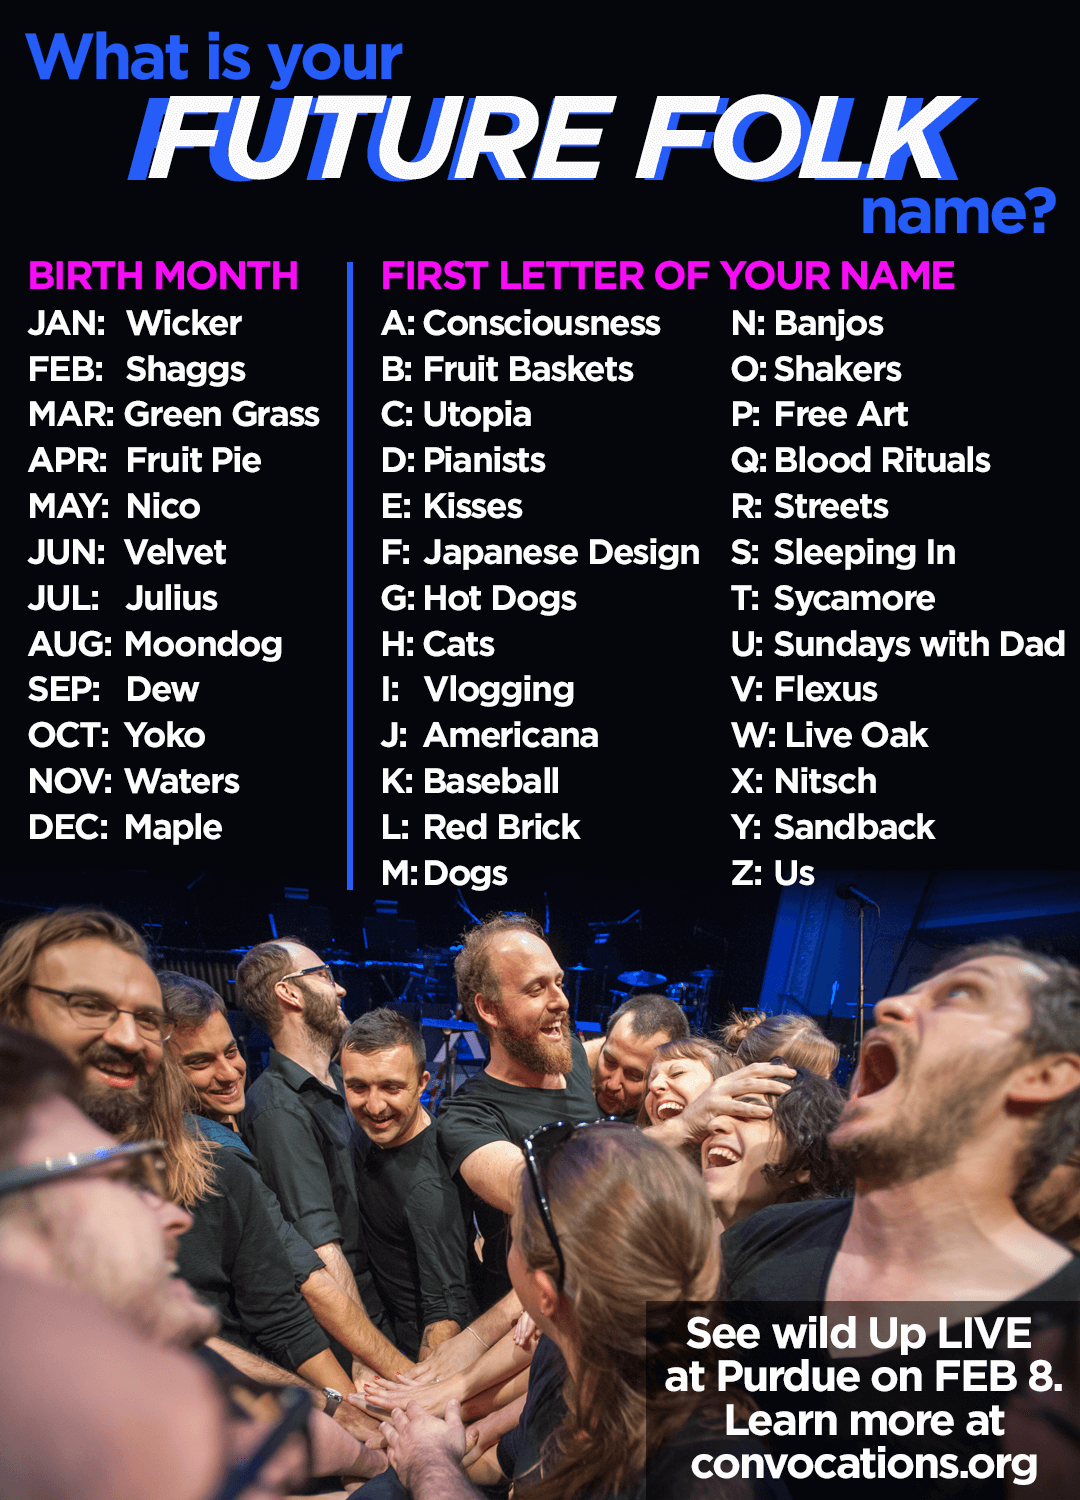 what's your FUTURE FOLK name? YOUR BIRTH MONTH JAN: Wicker FEB: Shaggs MAR: Green Grass APRIL: Fruit Pie MAY: Nico JUNE: Velvet JULY: Julius AUG: Moondog SEP: Dew OCT: Yoko NOV: Waters DEC: Maple FIRST LETTER OF YOUR NAME A: Consciousness B: Fruit Baskets C: Utopia D: Pianists E: Kisses F: Japanese Design G: Hot Dogs H: Cats I: Vlogging J: Americana K: Baseball L: Red Brick Street M: Dogs N: Banjos O: Shakers P: Free Art Q: Blood Rituals R: Red Brick Streets S: Sleeping In T: Sycamore U: Sundays with Dad V: Flexus W: Live Oak X: Nitsch Y: Sandback Z: Us